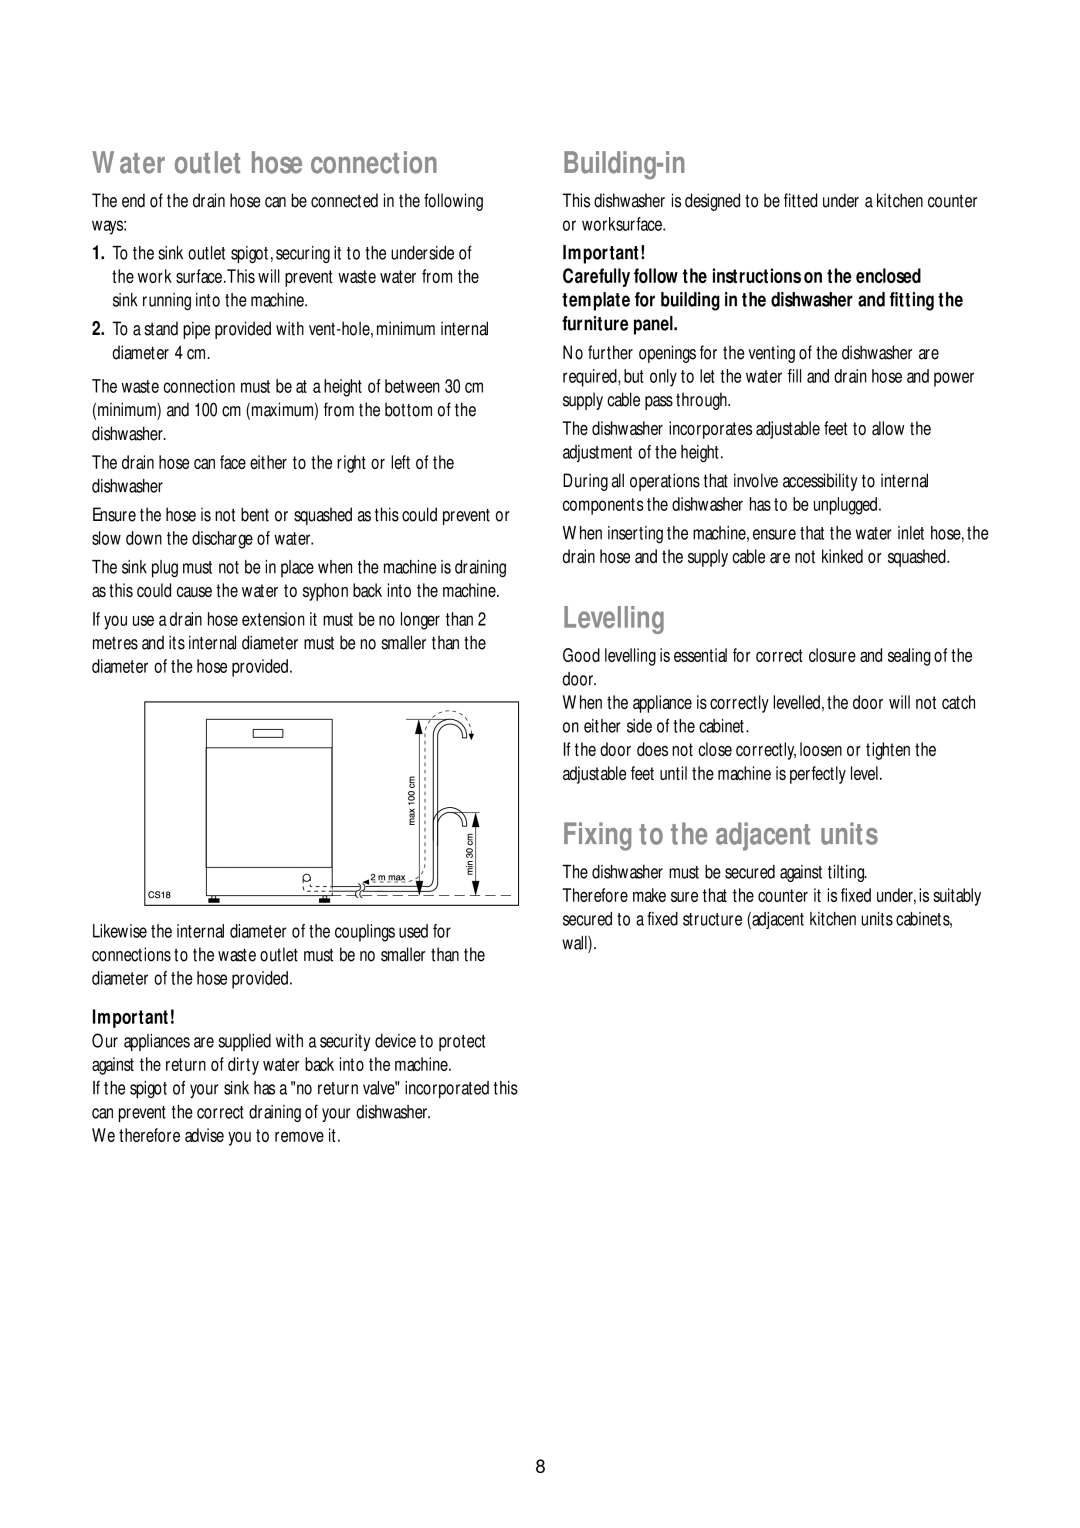 John Lewis JLBIDW 901 instruction manual Water outlet hose connection, Building-in, Levelling, Fixing to the adjacent units 